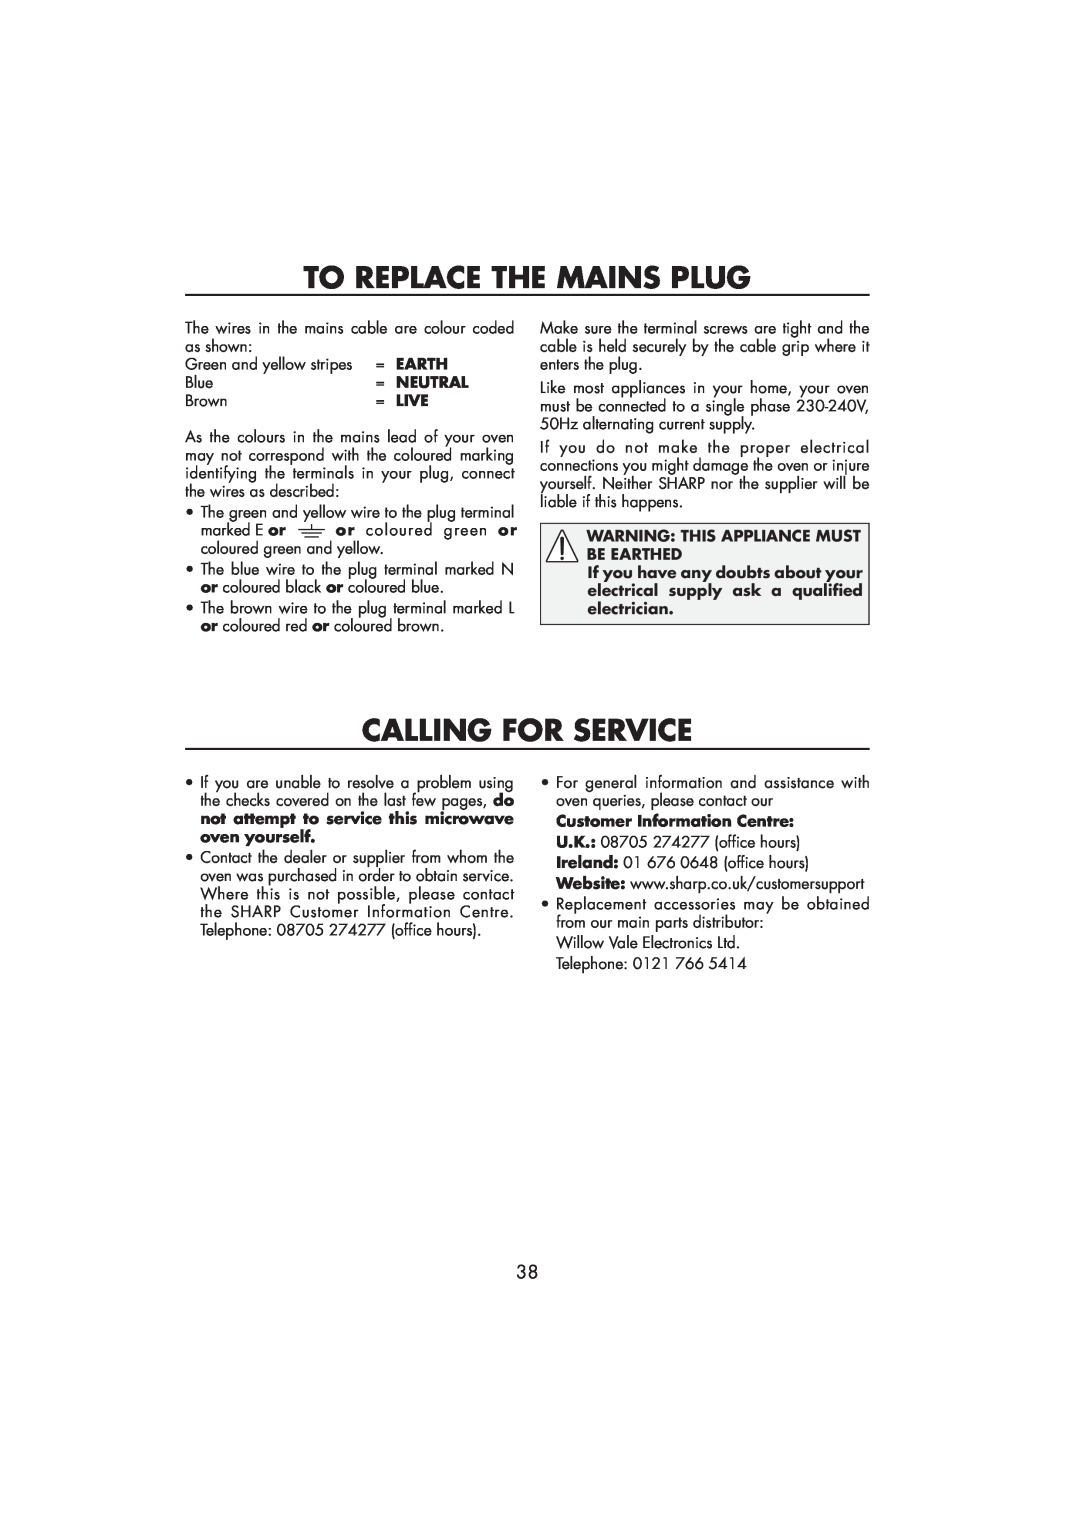 Sharp R-890SLM operation manual To Replace The Mains Plug, Calling For Service, Warning This Appliance Must Be Earthed 